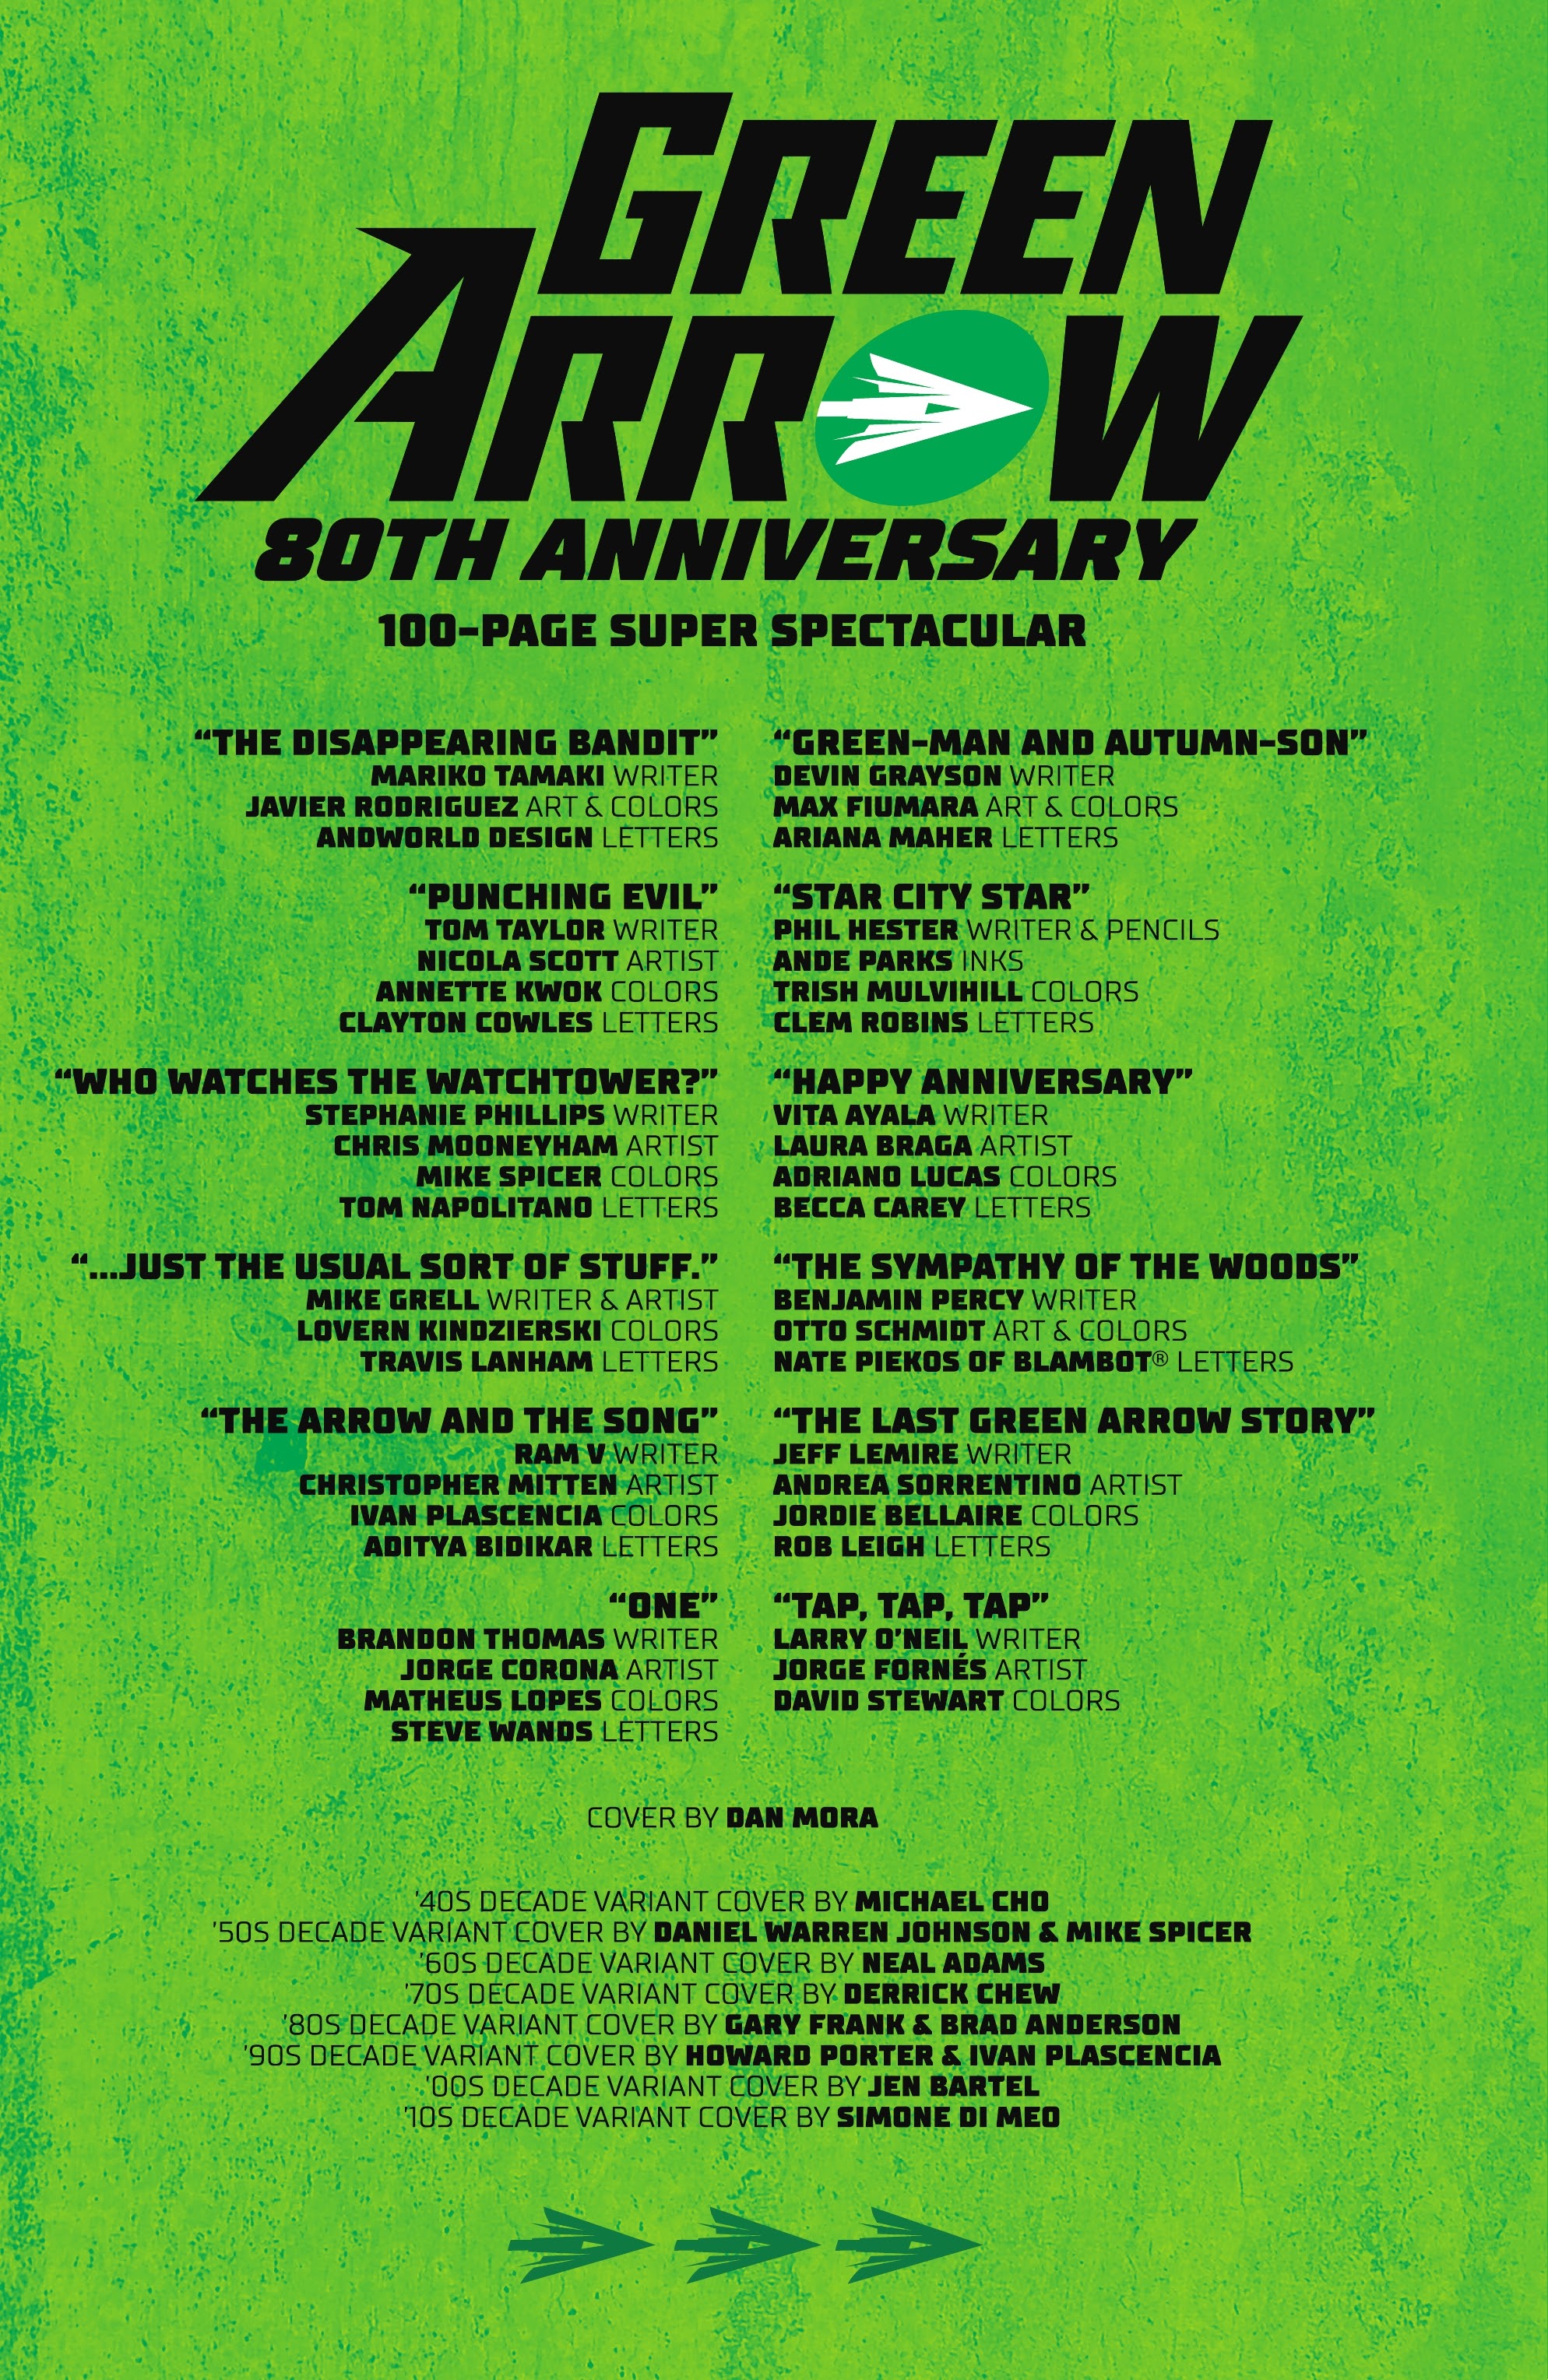 Read online Green Arrow 80th Anniversary 100-Page Super Spectacular comic -  Issue # TPB - 3